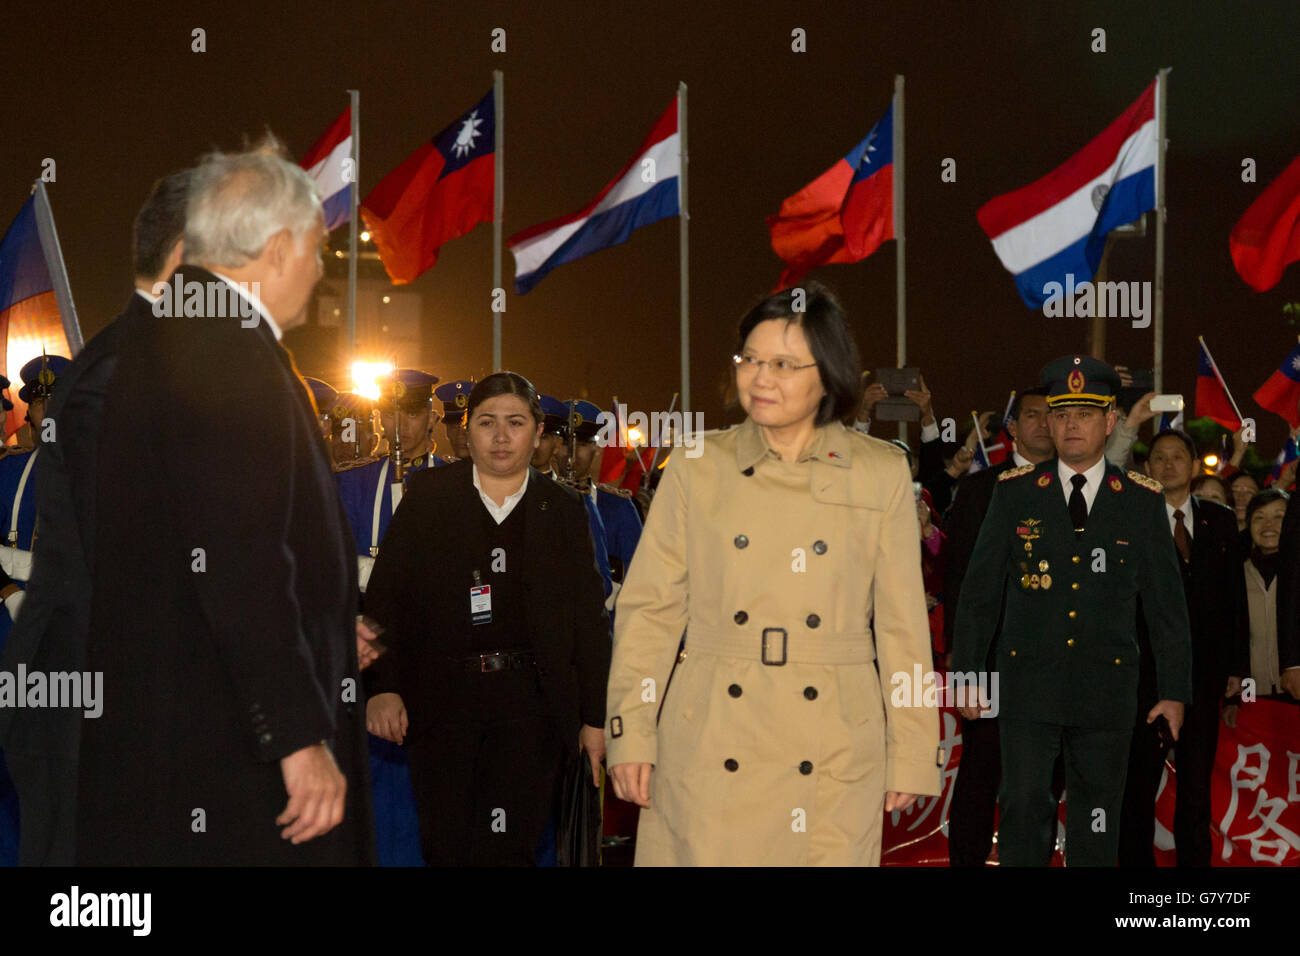 Asuncion, Paraguay. 27th June, 2016. Taiwan's (Republic of China) President Tsai Ing-wen welcomed by local authorities at Silvio Pettirossi International Airport, Luque, Paraguay. Credit: Andre M. Chang/Alamy Live News Stock Photo